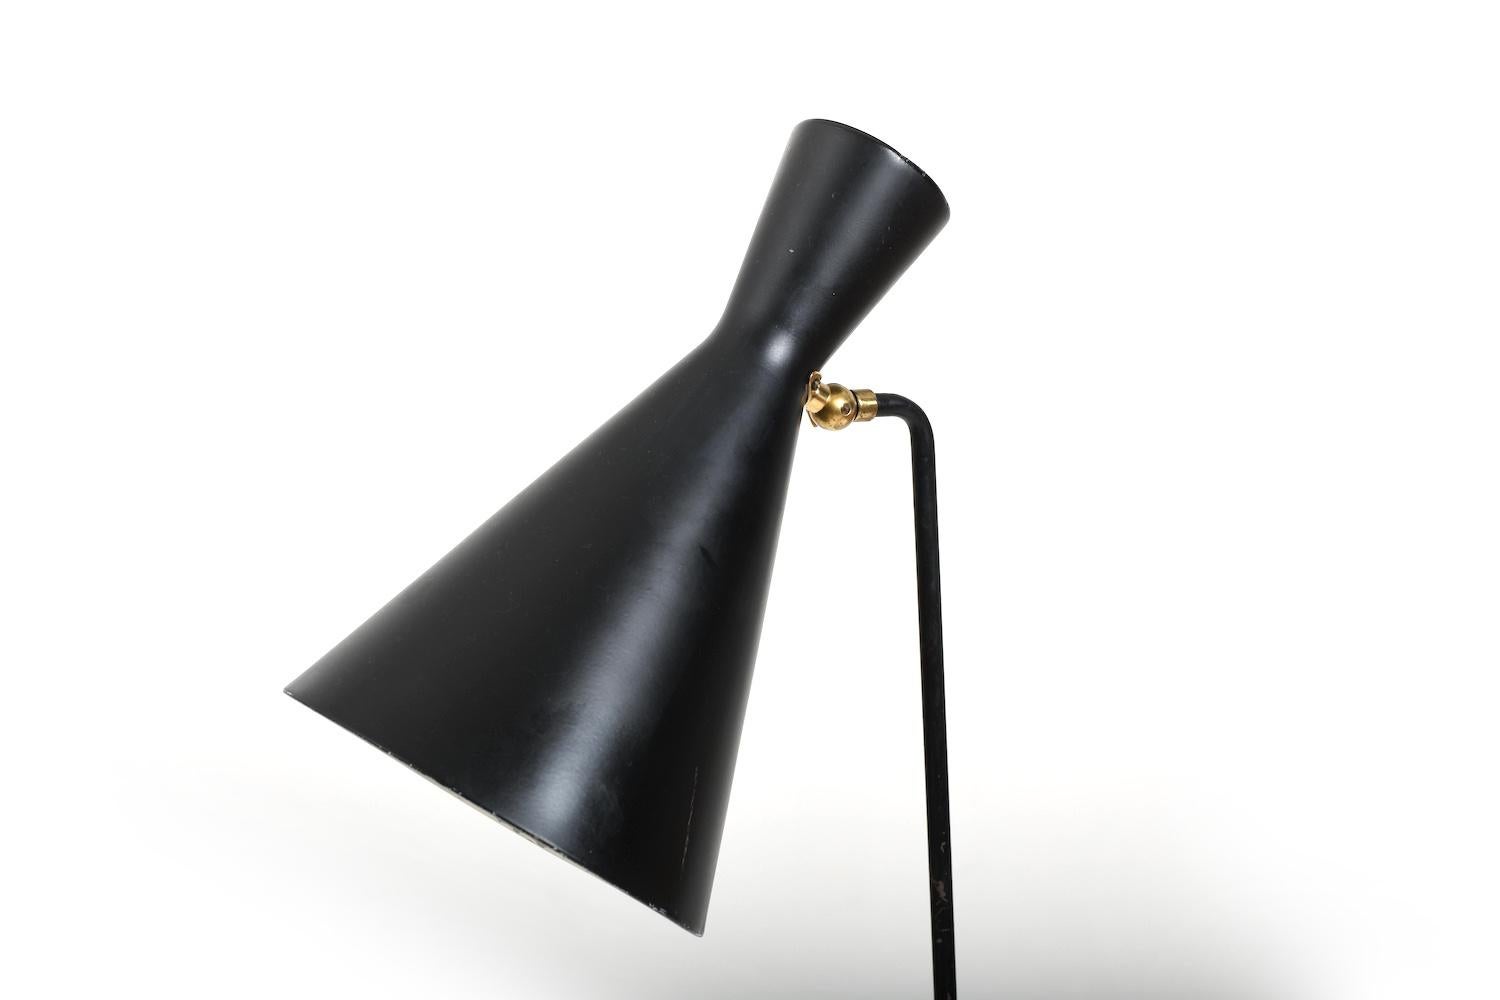 Floorlamp, model G123 by Knud Joos for LYFA Denmark, 1950s. Brass and black lacquered metal.